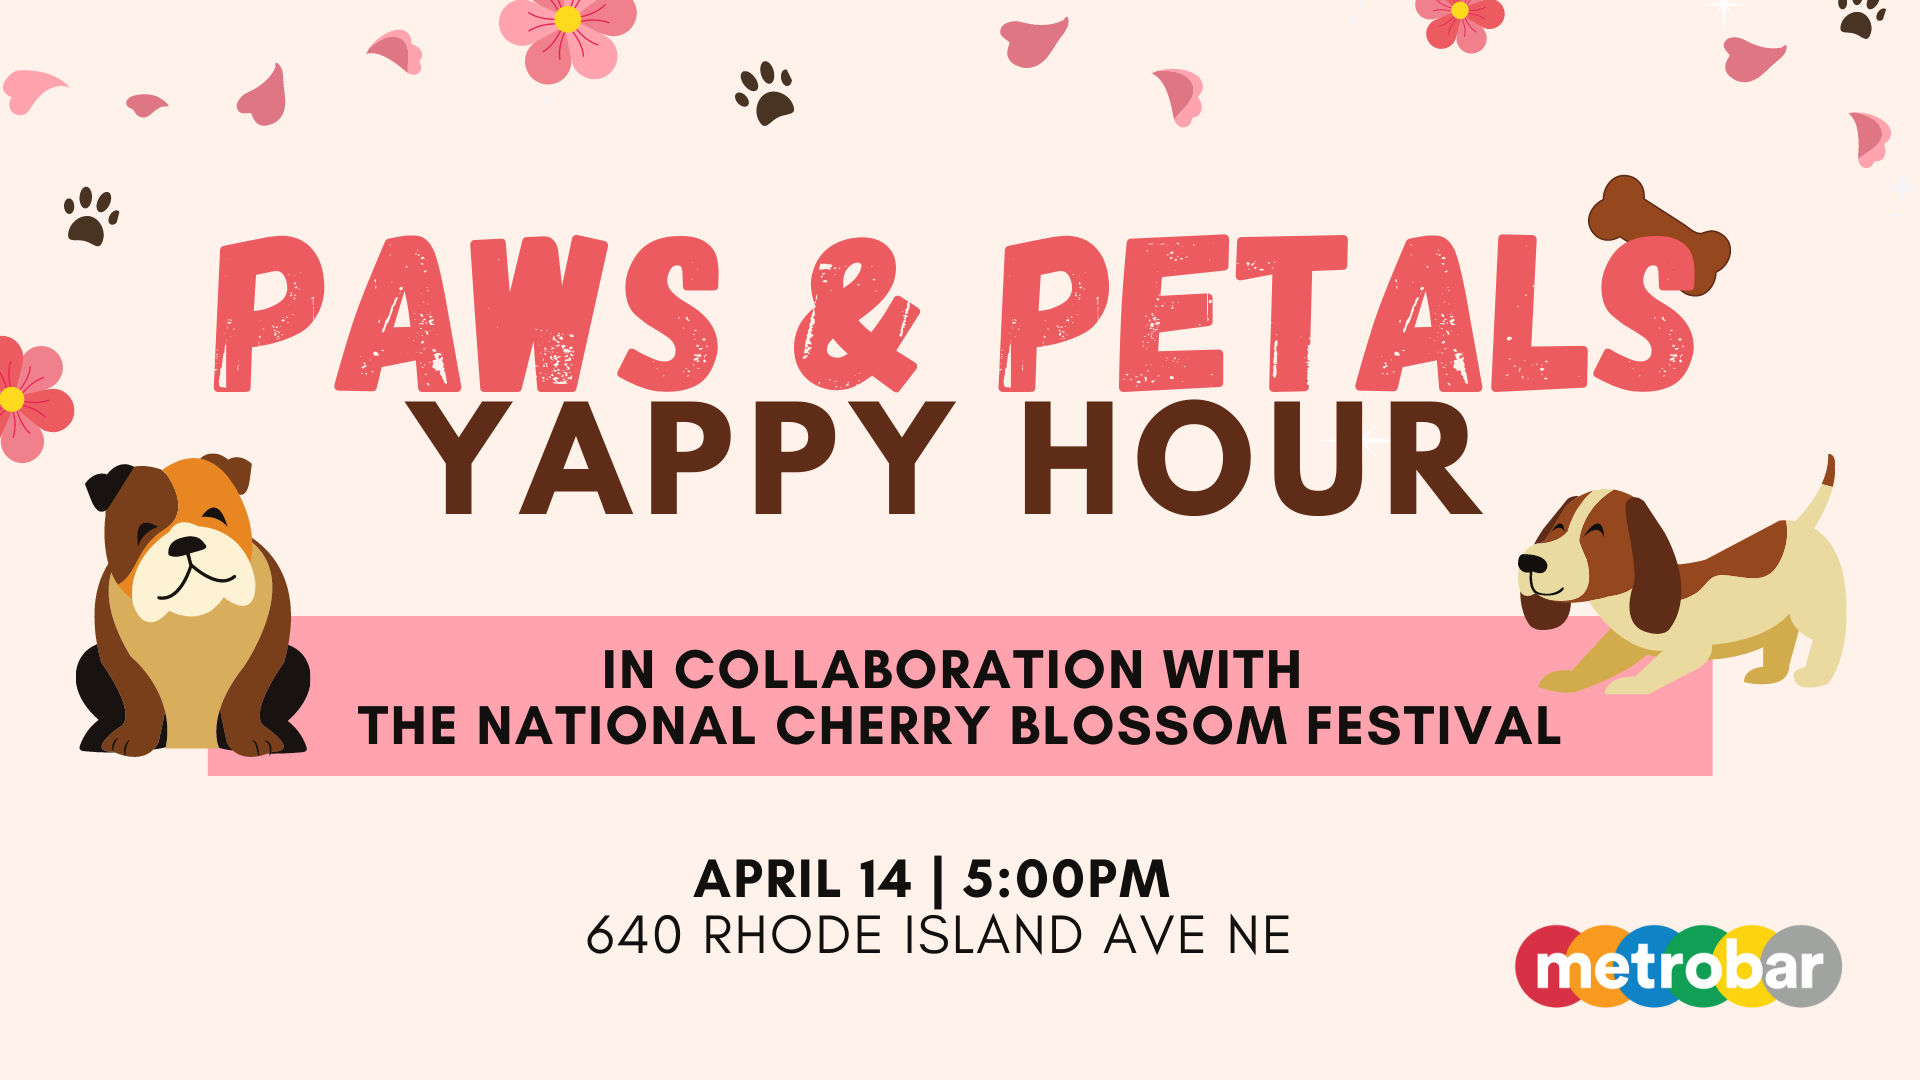 Paws & Petals Yappy Hour